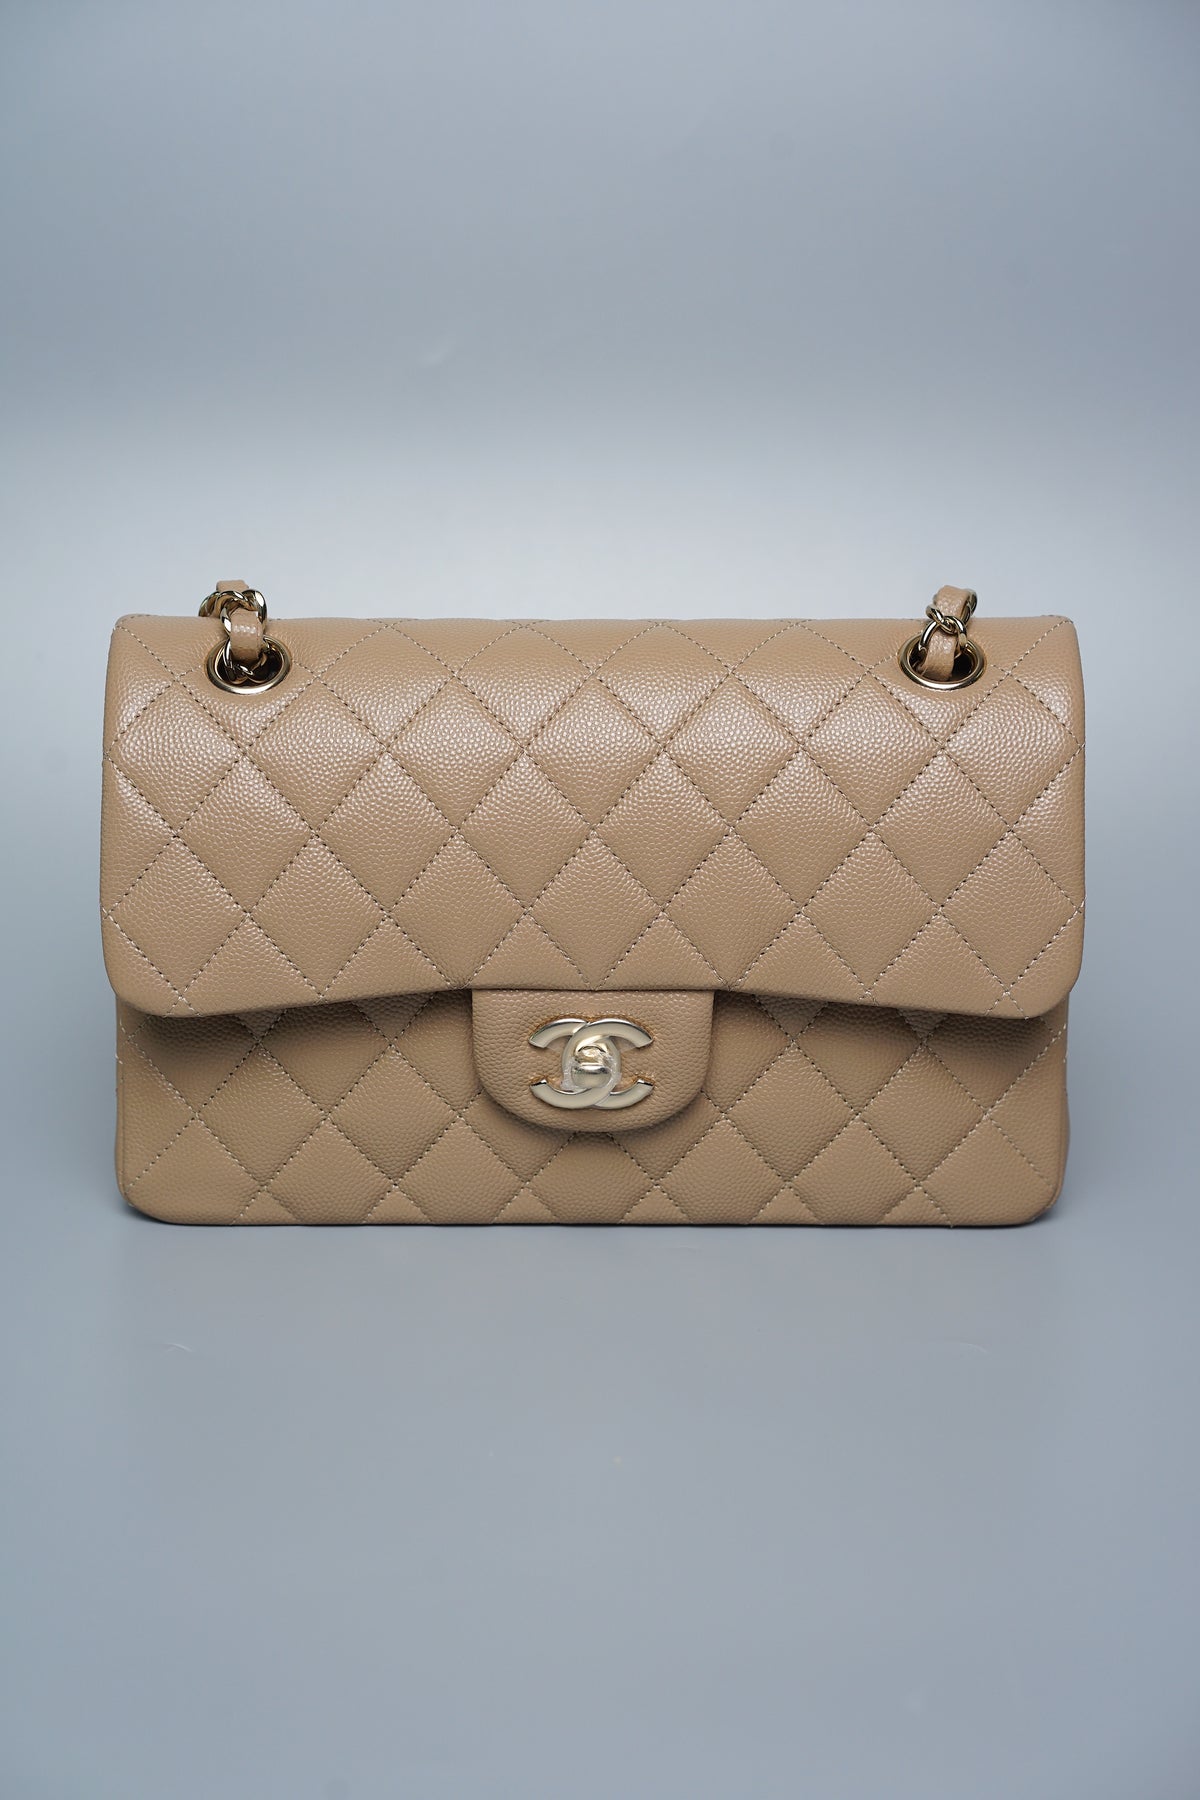 Chanel 22A Small Double Flap in Dark Beige Ghw (Brand New)